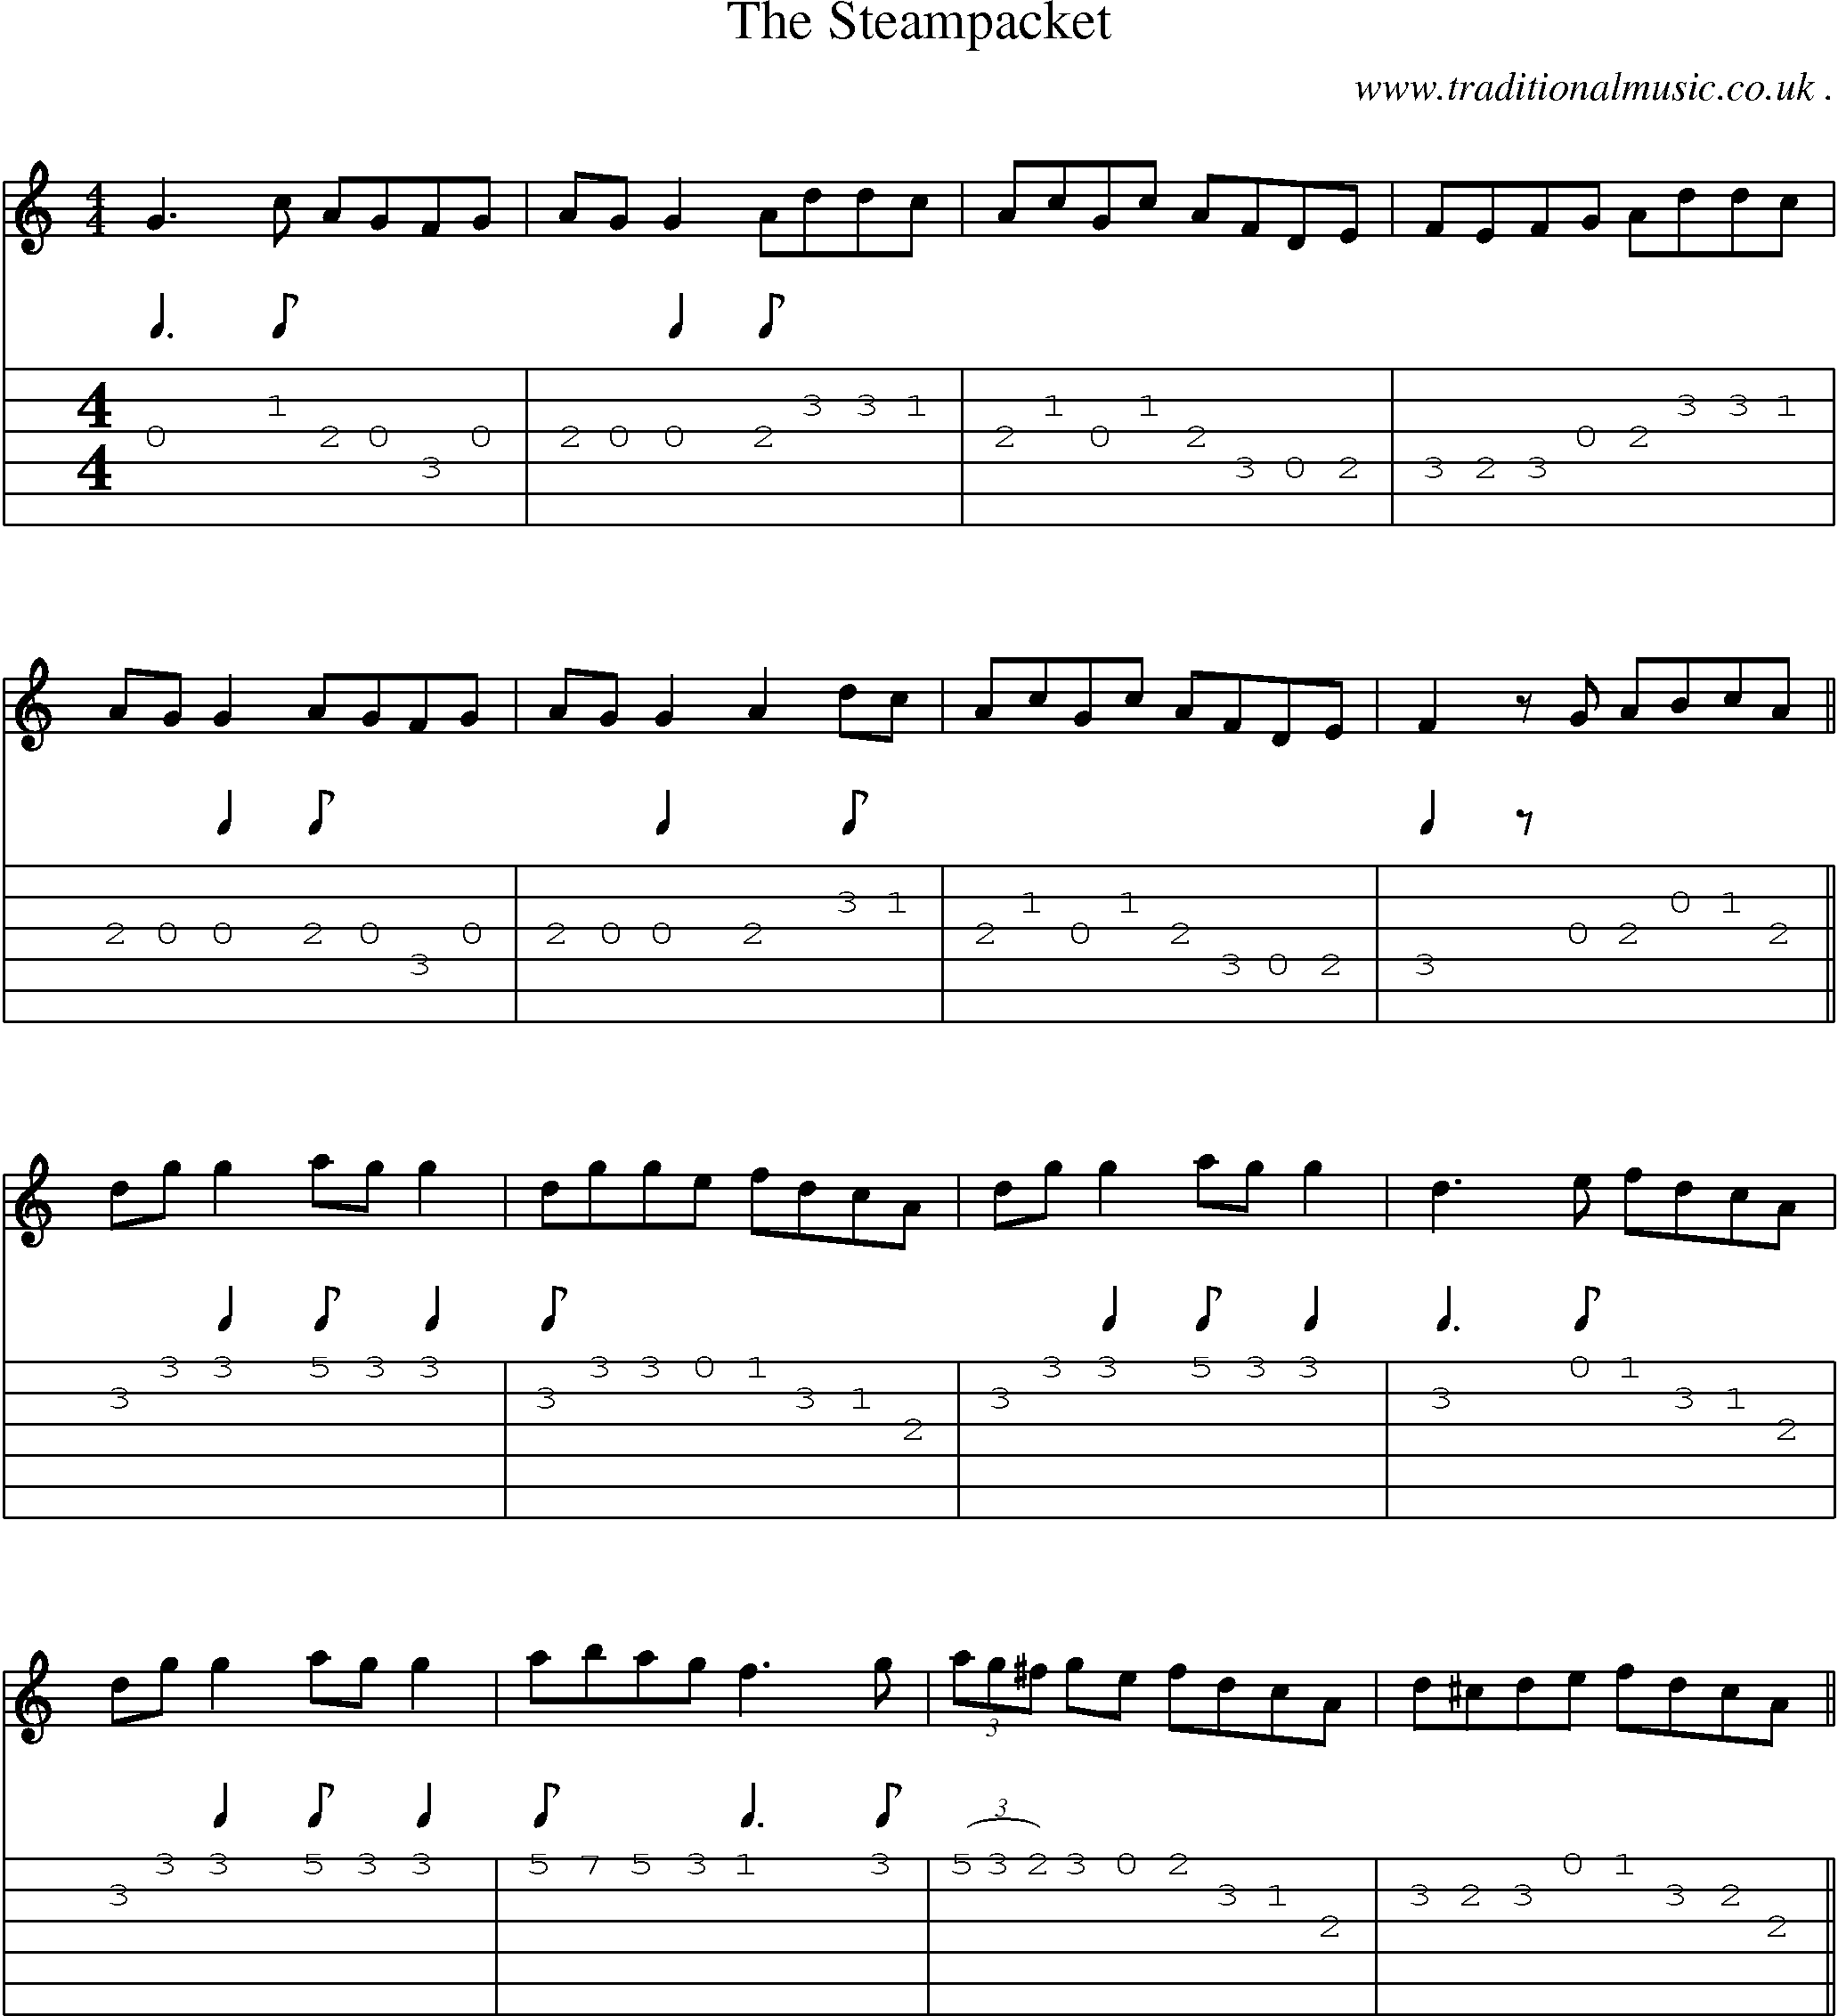 Sheet-Music and Guitar Tabs for The Steampacket